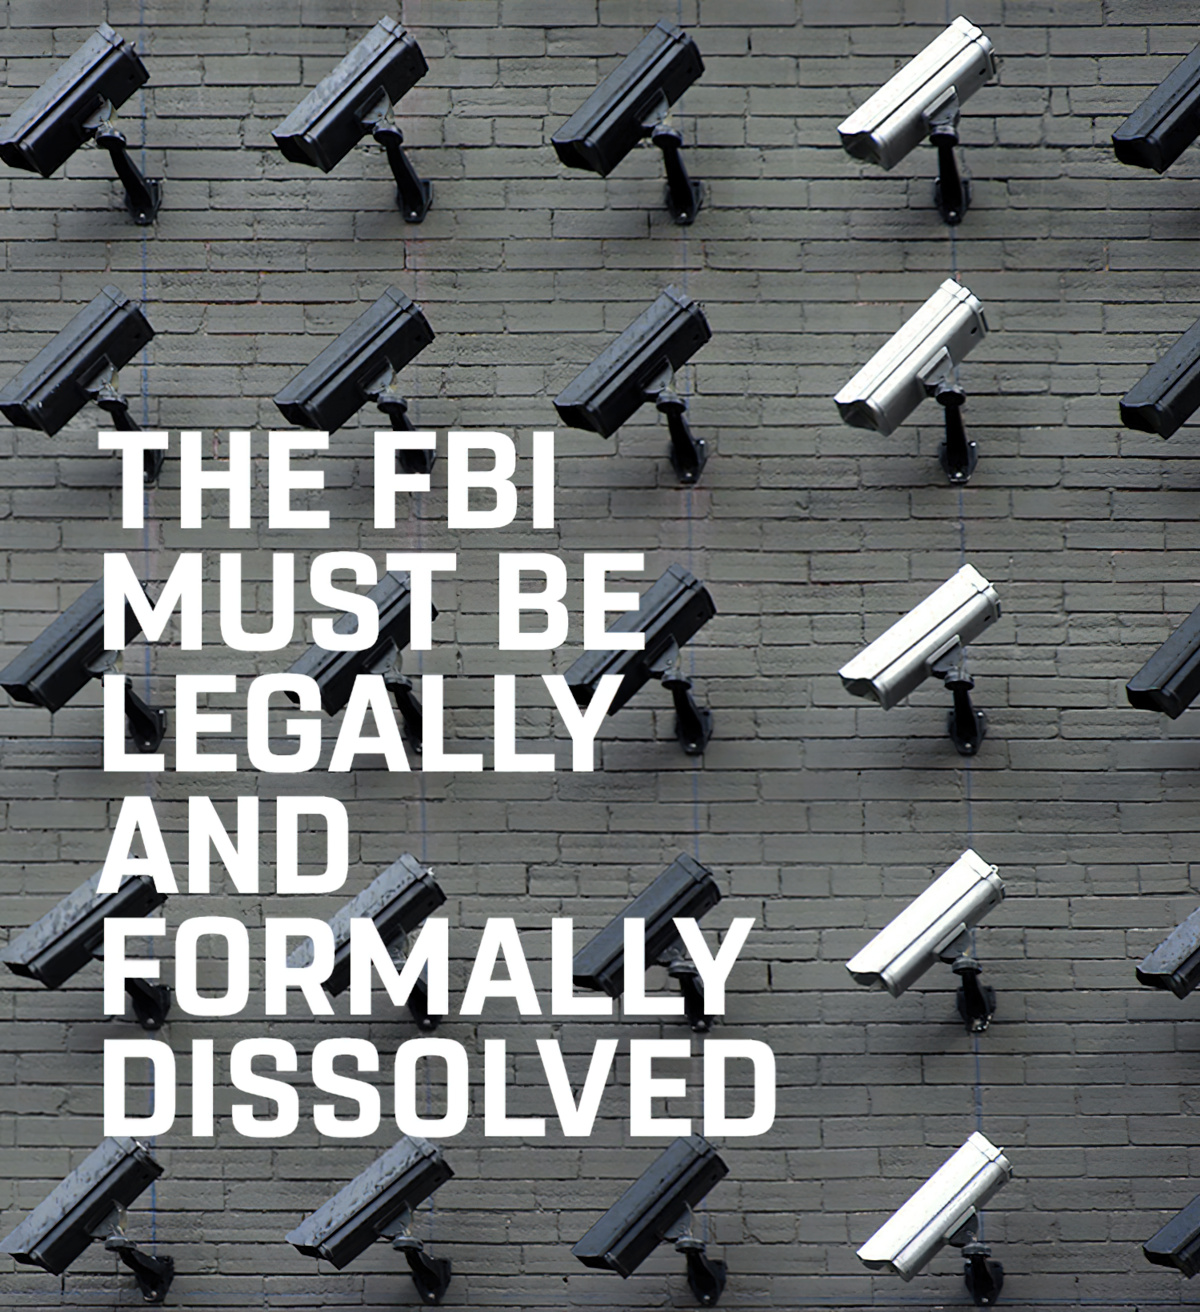 Should the FBI legally and formally be dissolved?